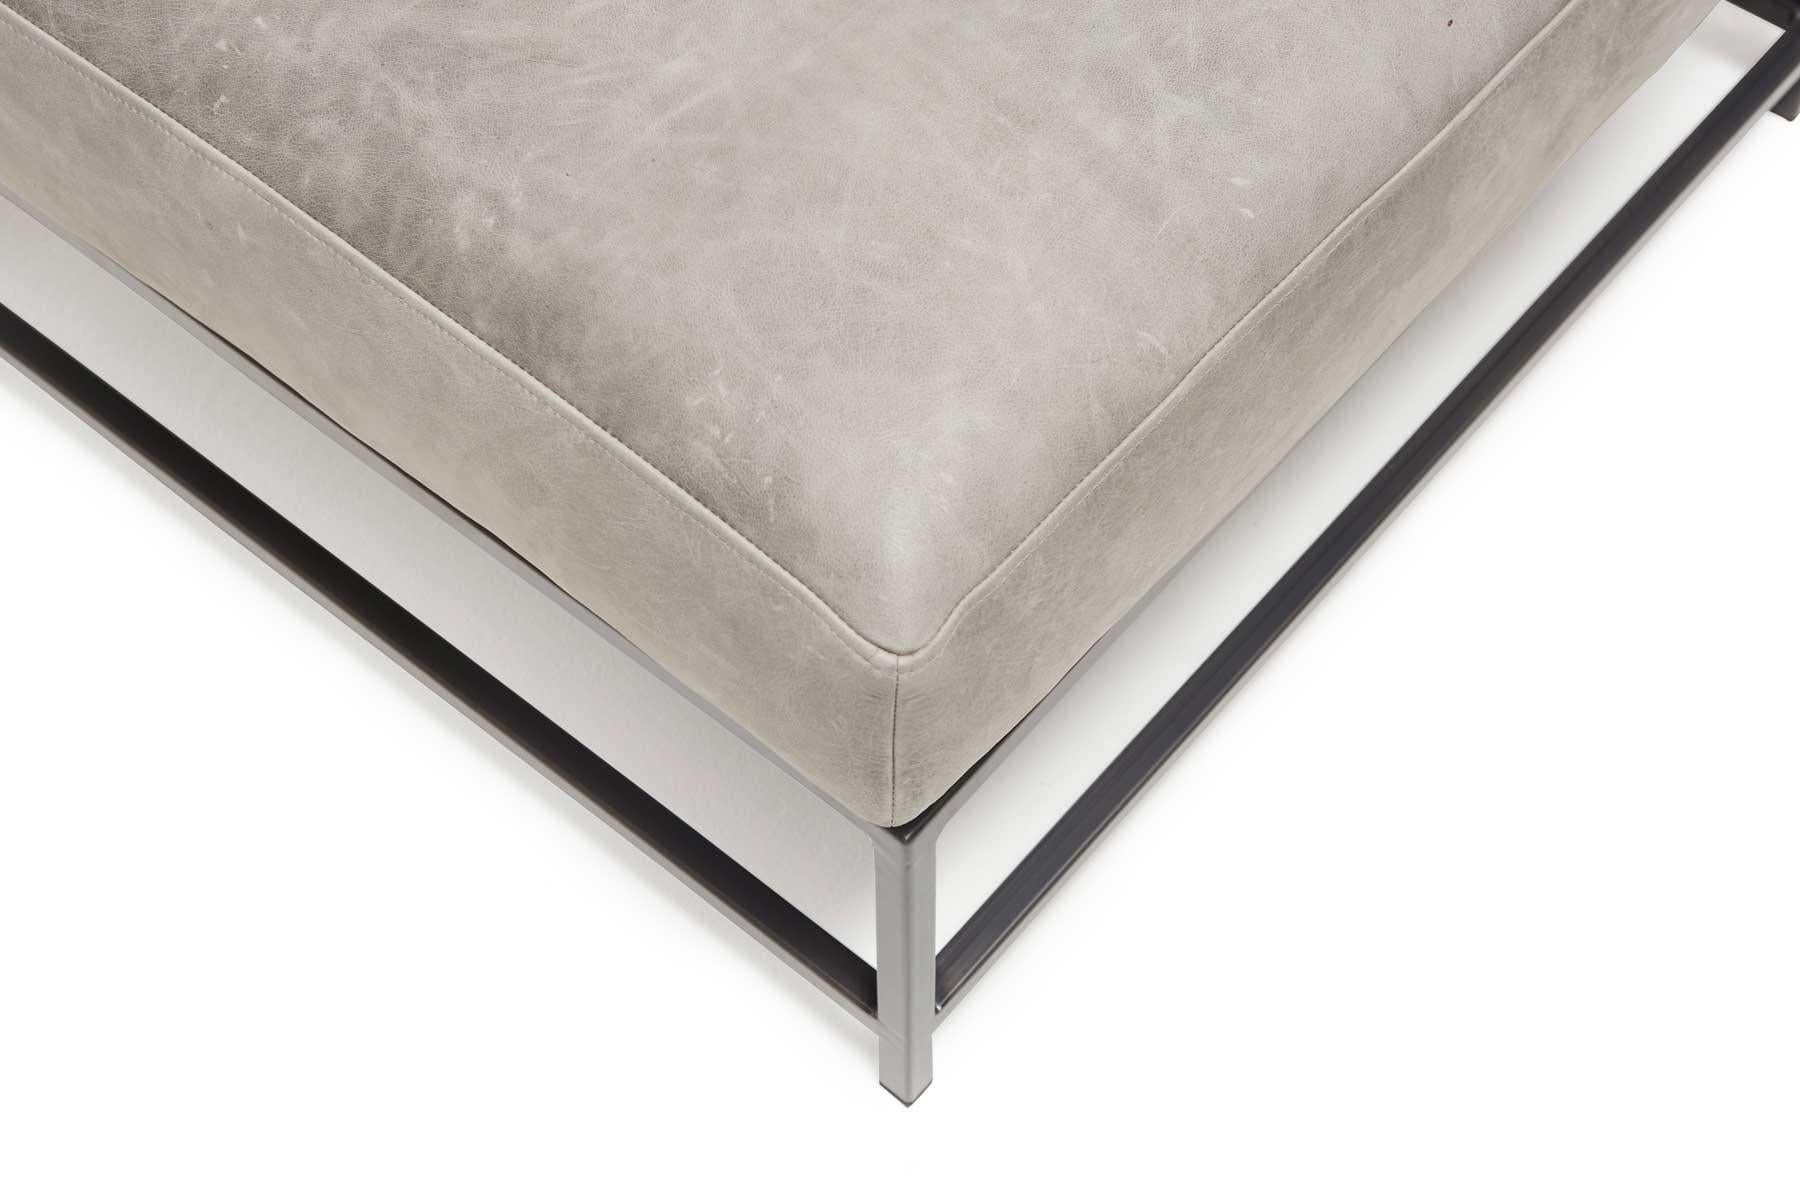 The ottoman from Stephen Kenn's Inheritance Collection is a versatile piece to add a lounge element to your seating arrangement.

This ottoman is upholstered in a light grey waxed leather from the Burnham collection by Moore & Giles. The foam